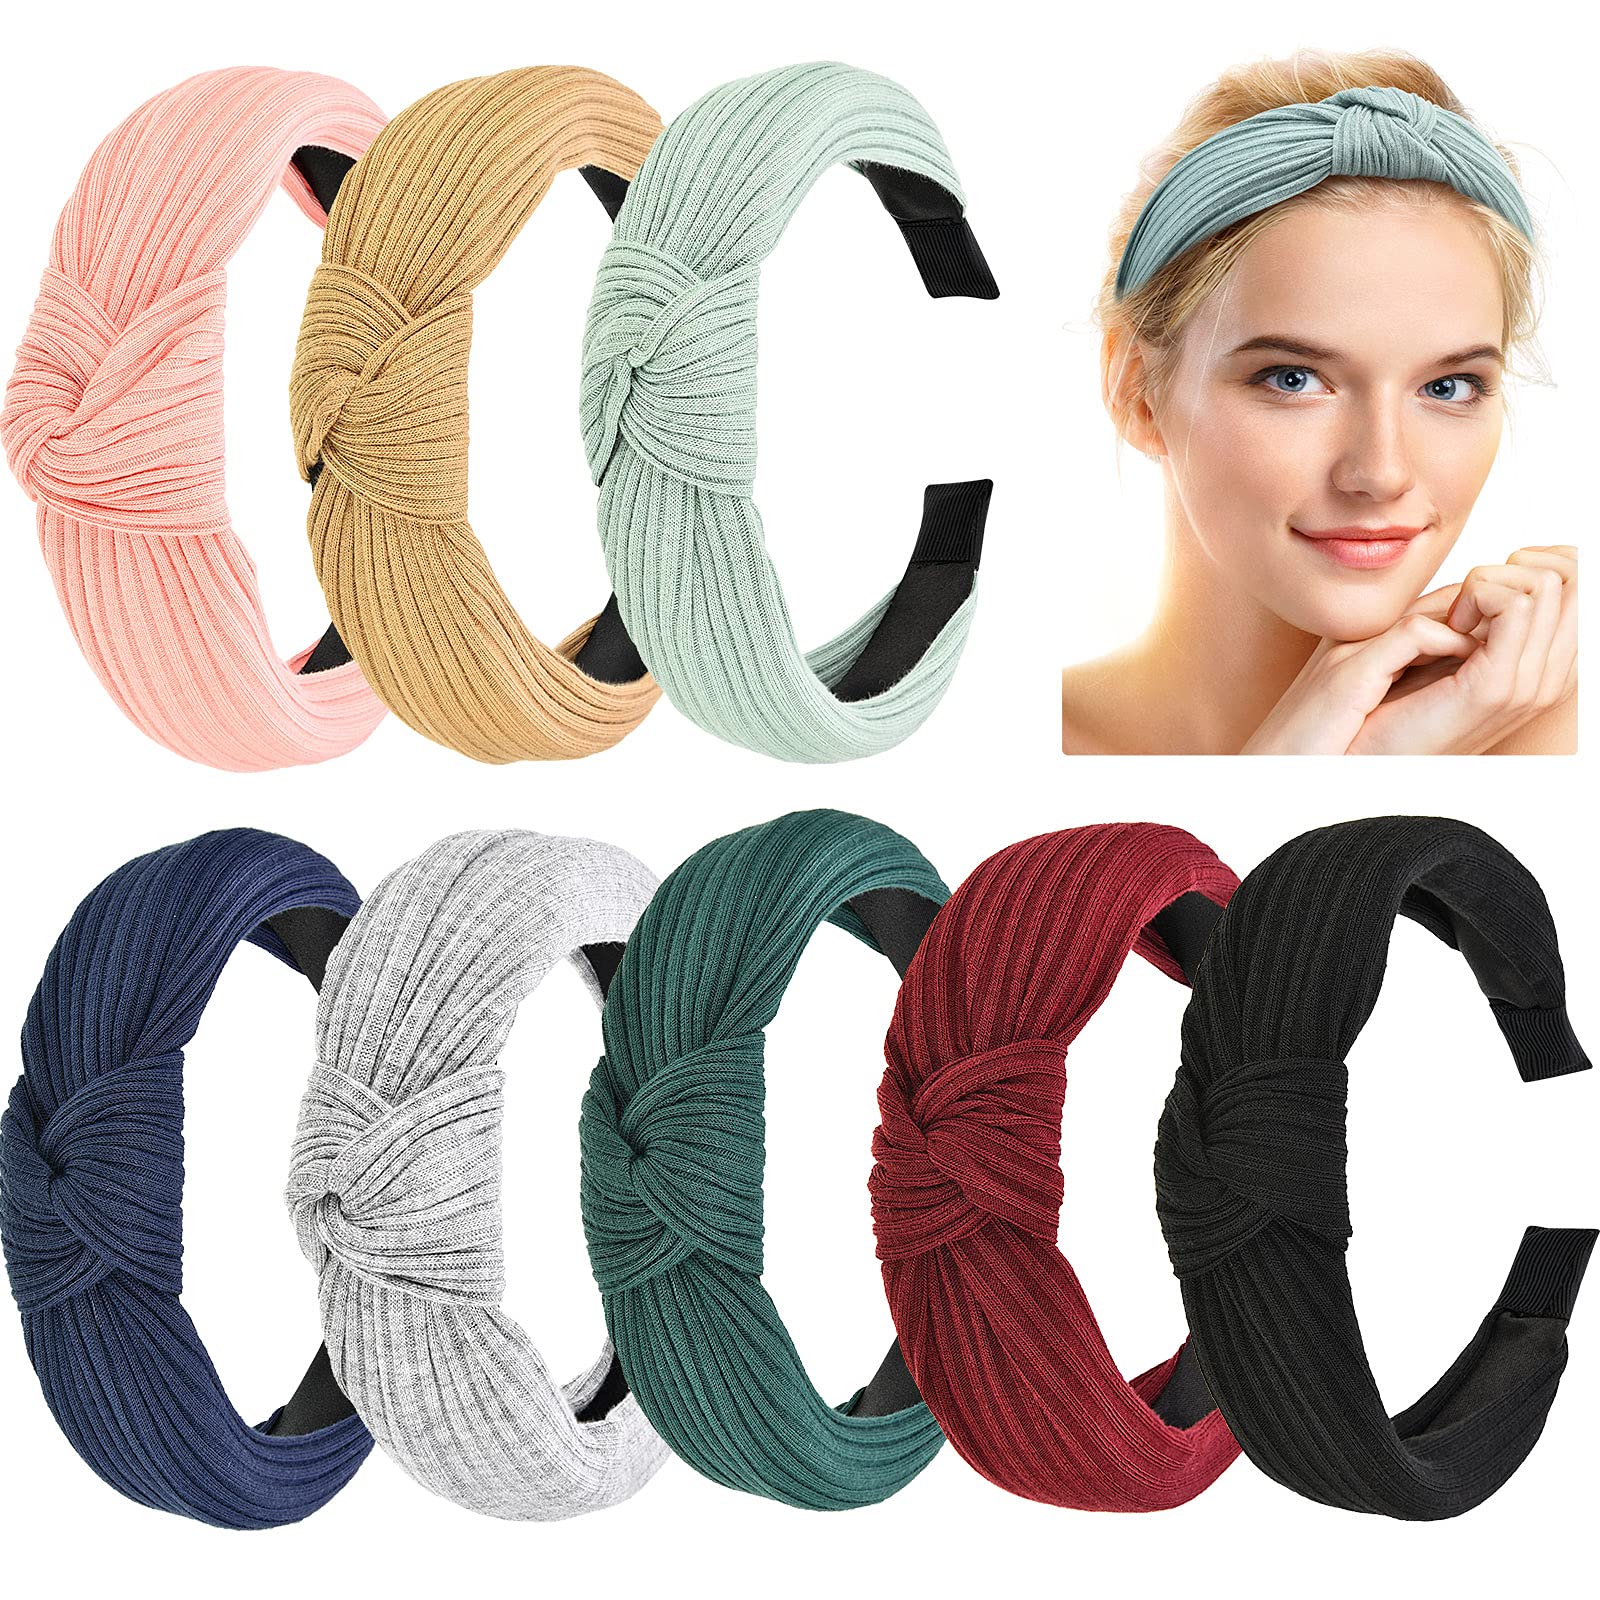 Maxdot 8 Pieces Headbands for Women Knotted Wide Headbands Knotted